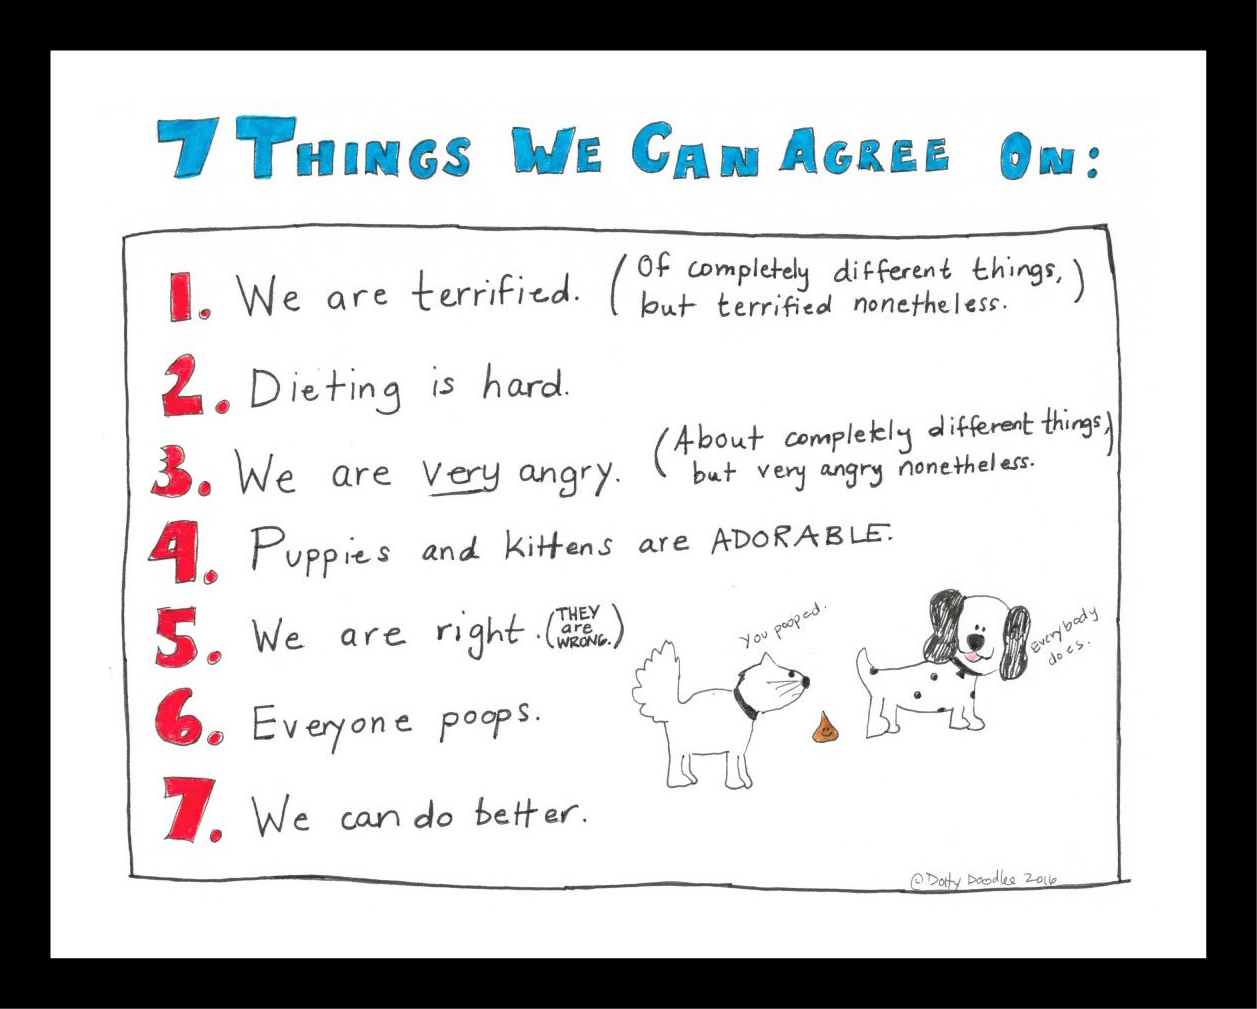 7 Things We Can Agree On